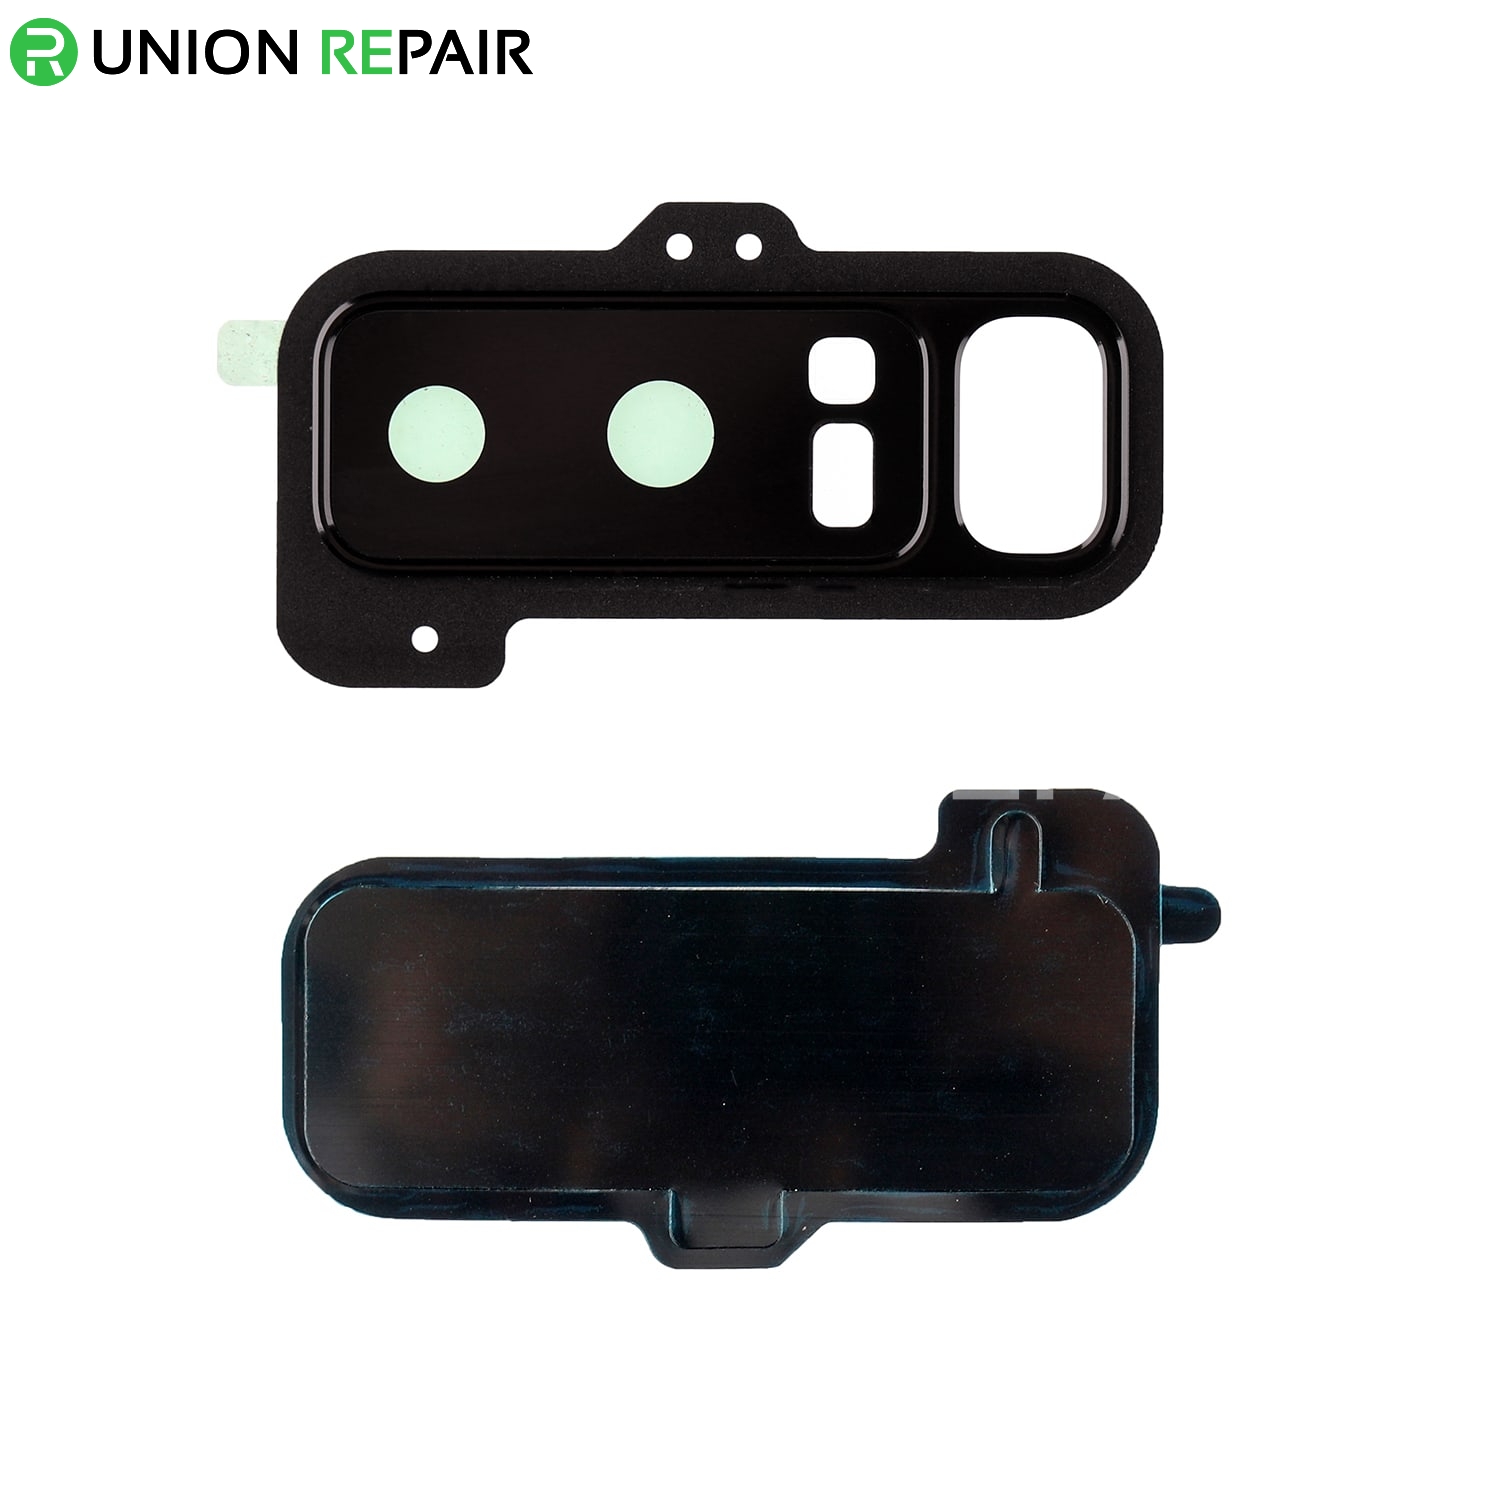 Replacement for Samsung Galaxy Note 8 Rear Camera Holder with Glass Lens